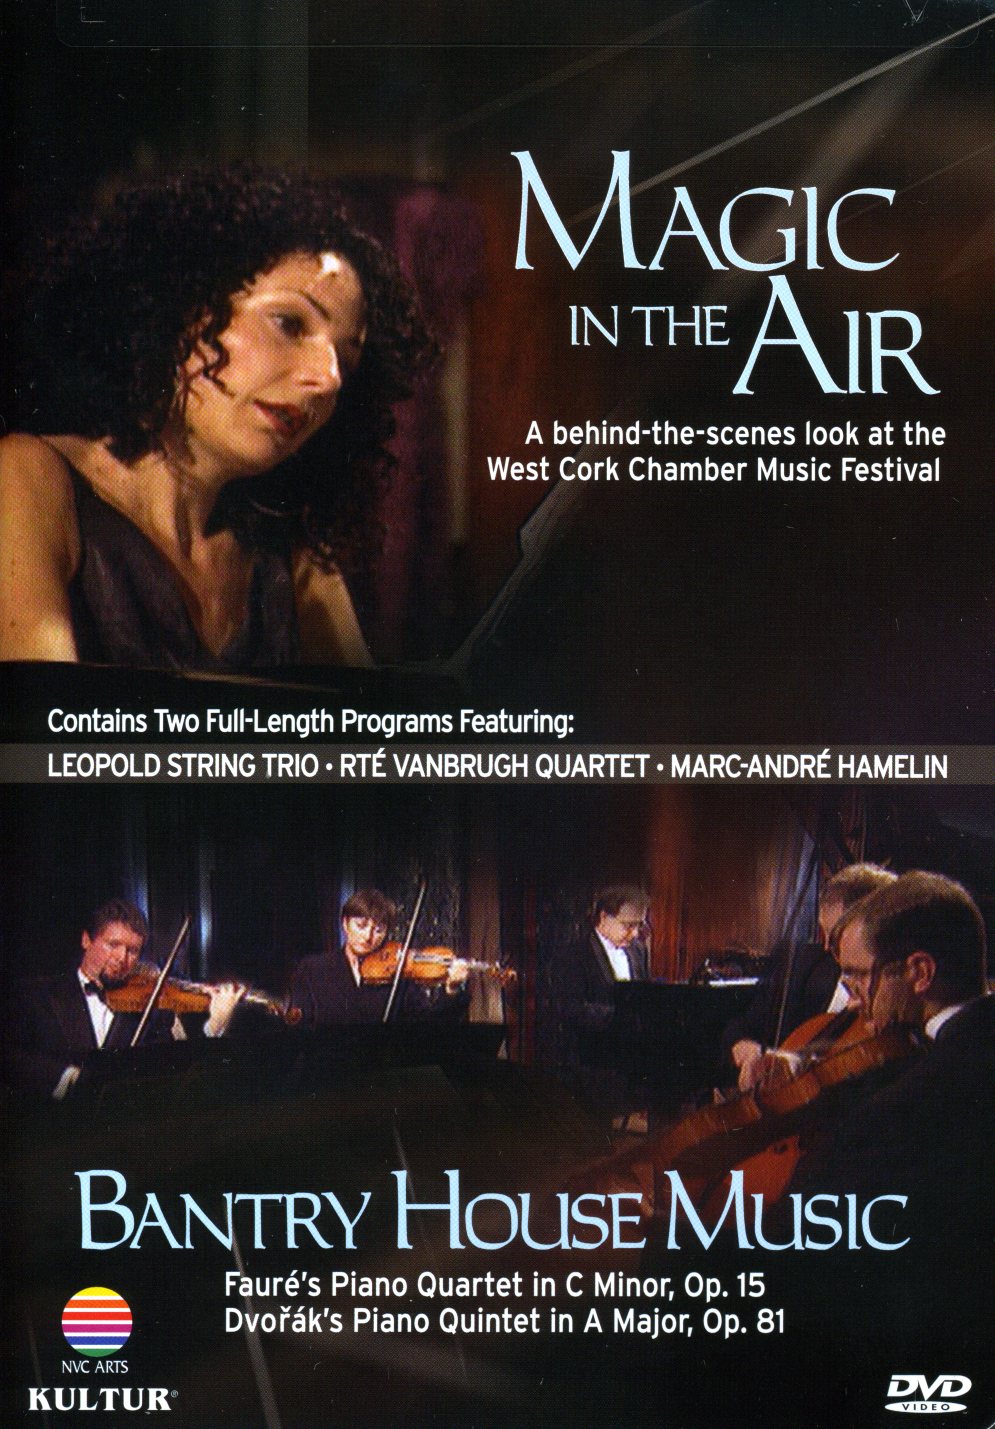 MAGIC IN THE AIR & BANTRY HOUSE MUSIC